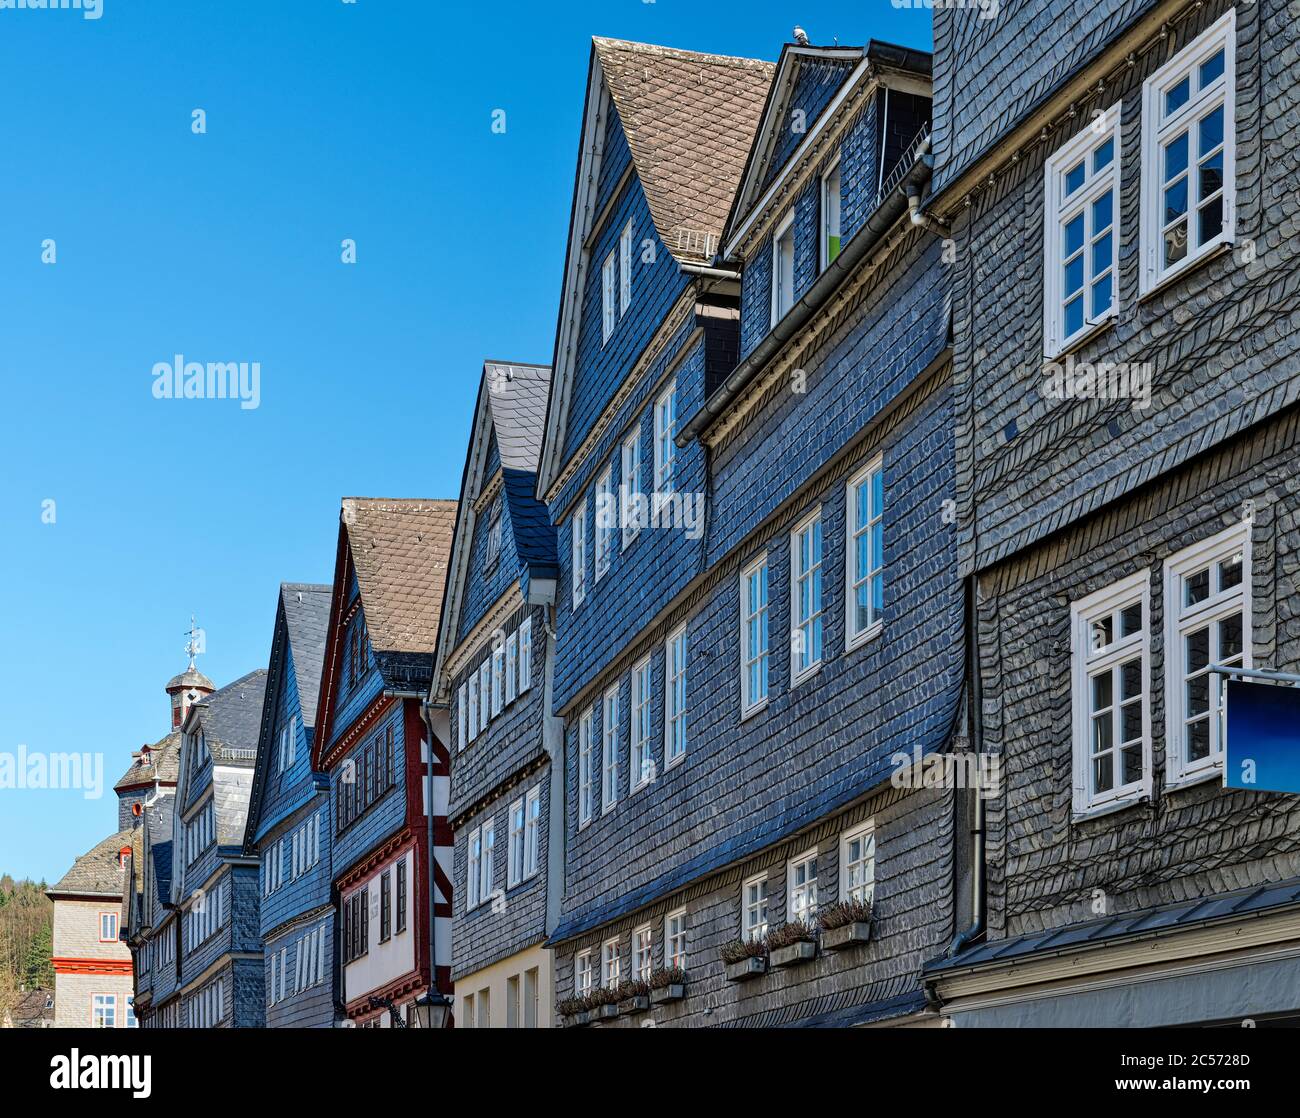 Europe, Germany, Hesse, Lahn-Dill-Bergland Nature Park, city of Herborn, slated houses in the main street, view to the market square with the town hal Stock Photo